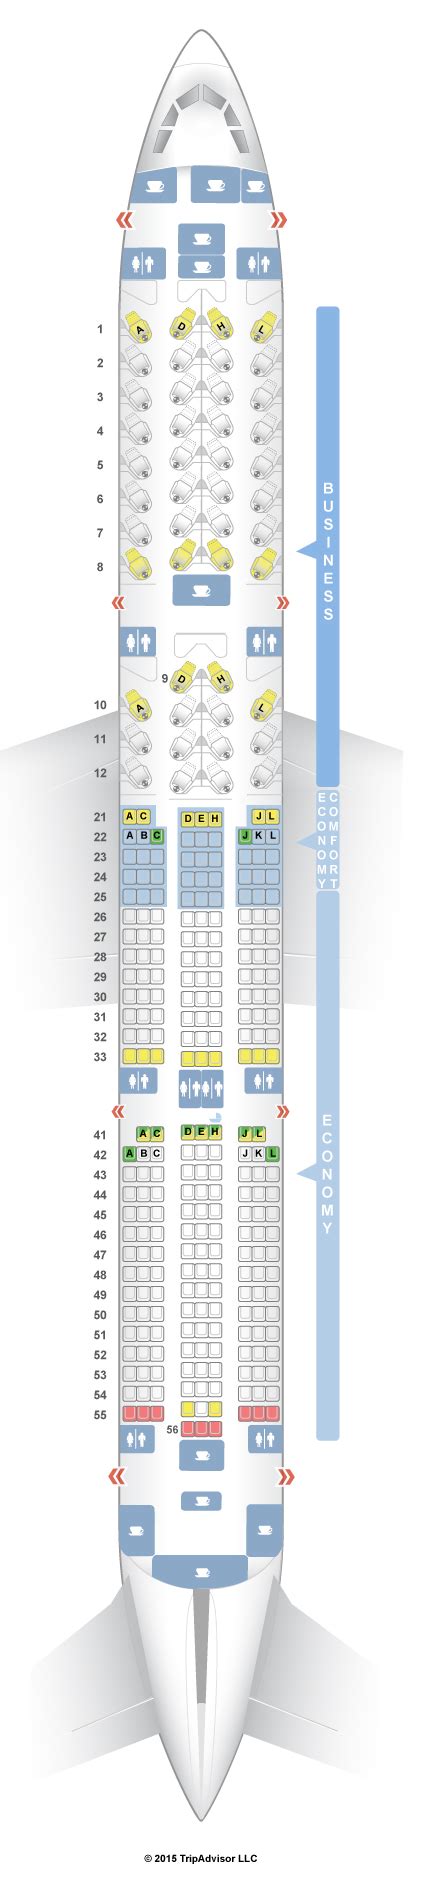 Seatguru airbus a350 900. Airbus A350-900 (359) Seat Map; Info; Photos; Click any seat for more information. Key ... 